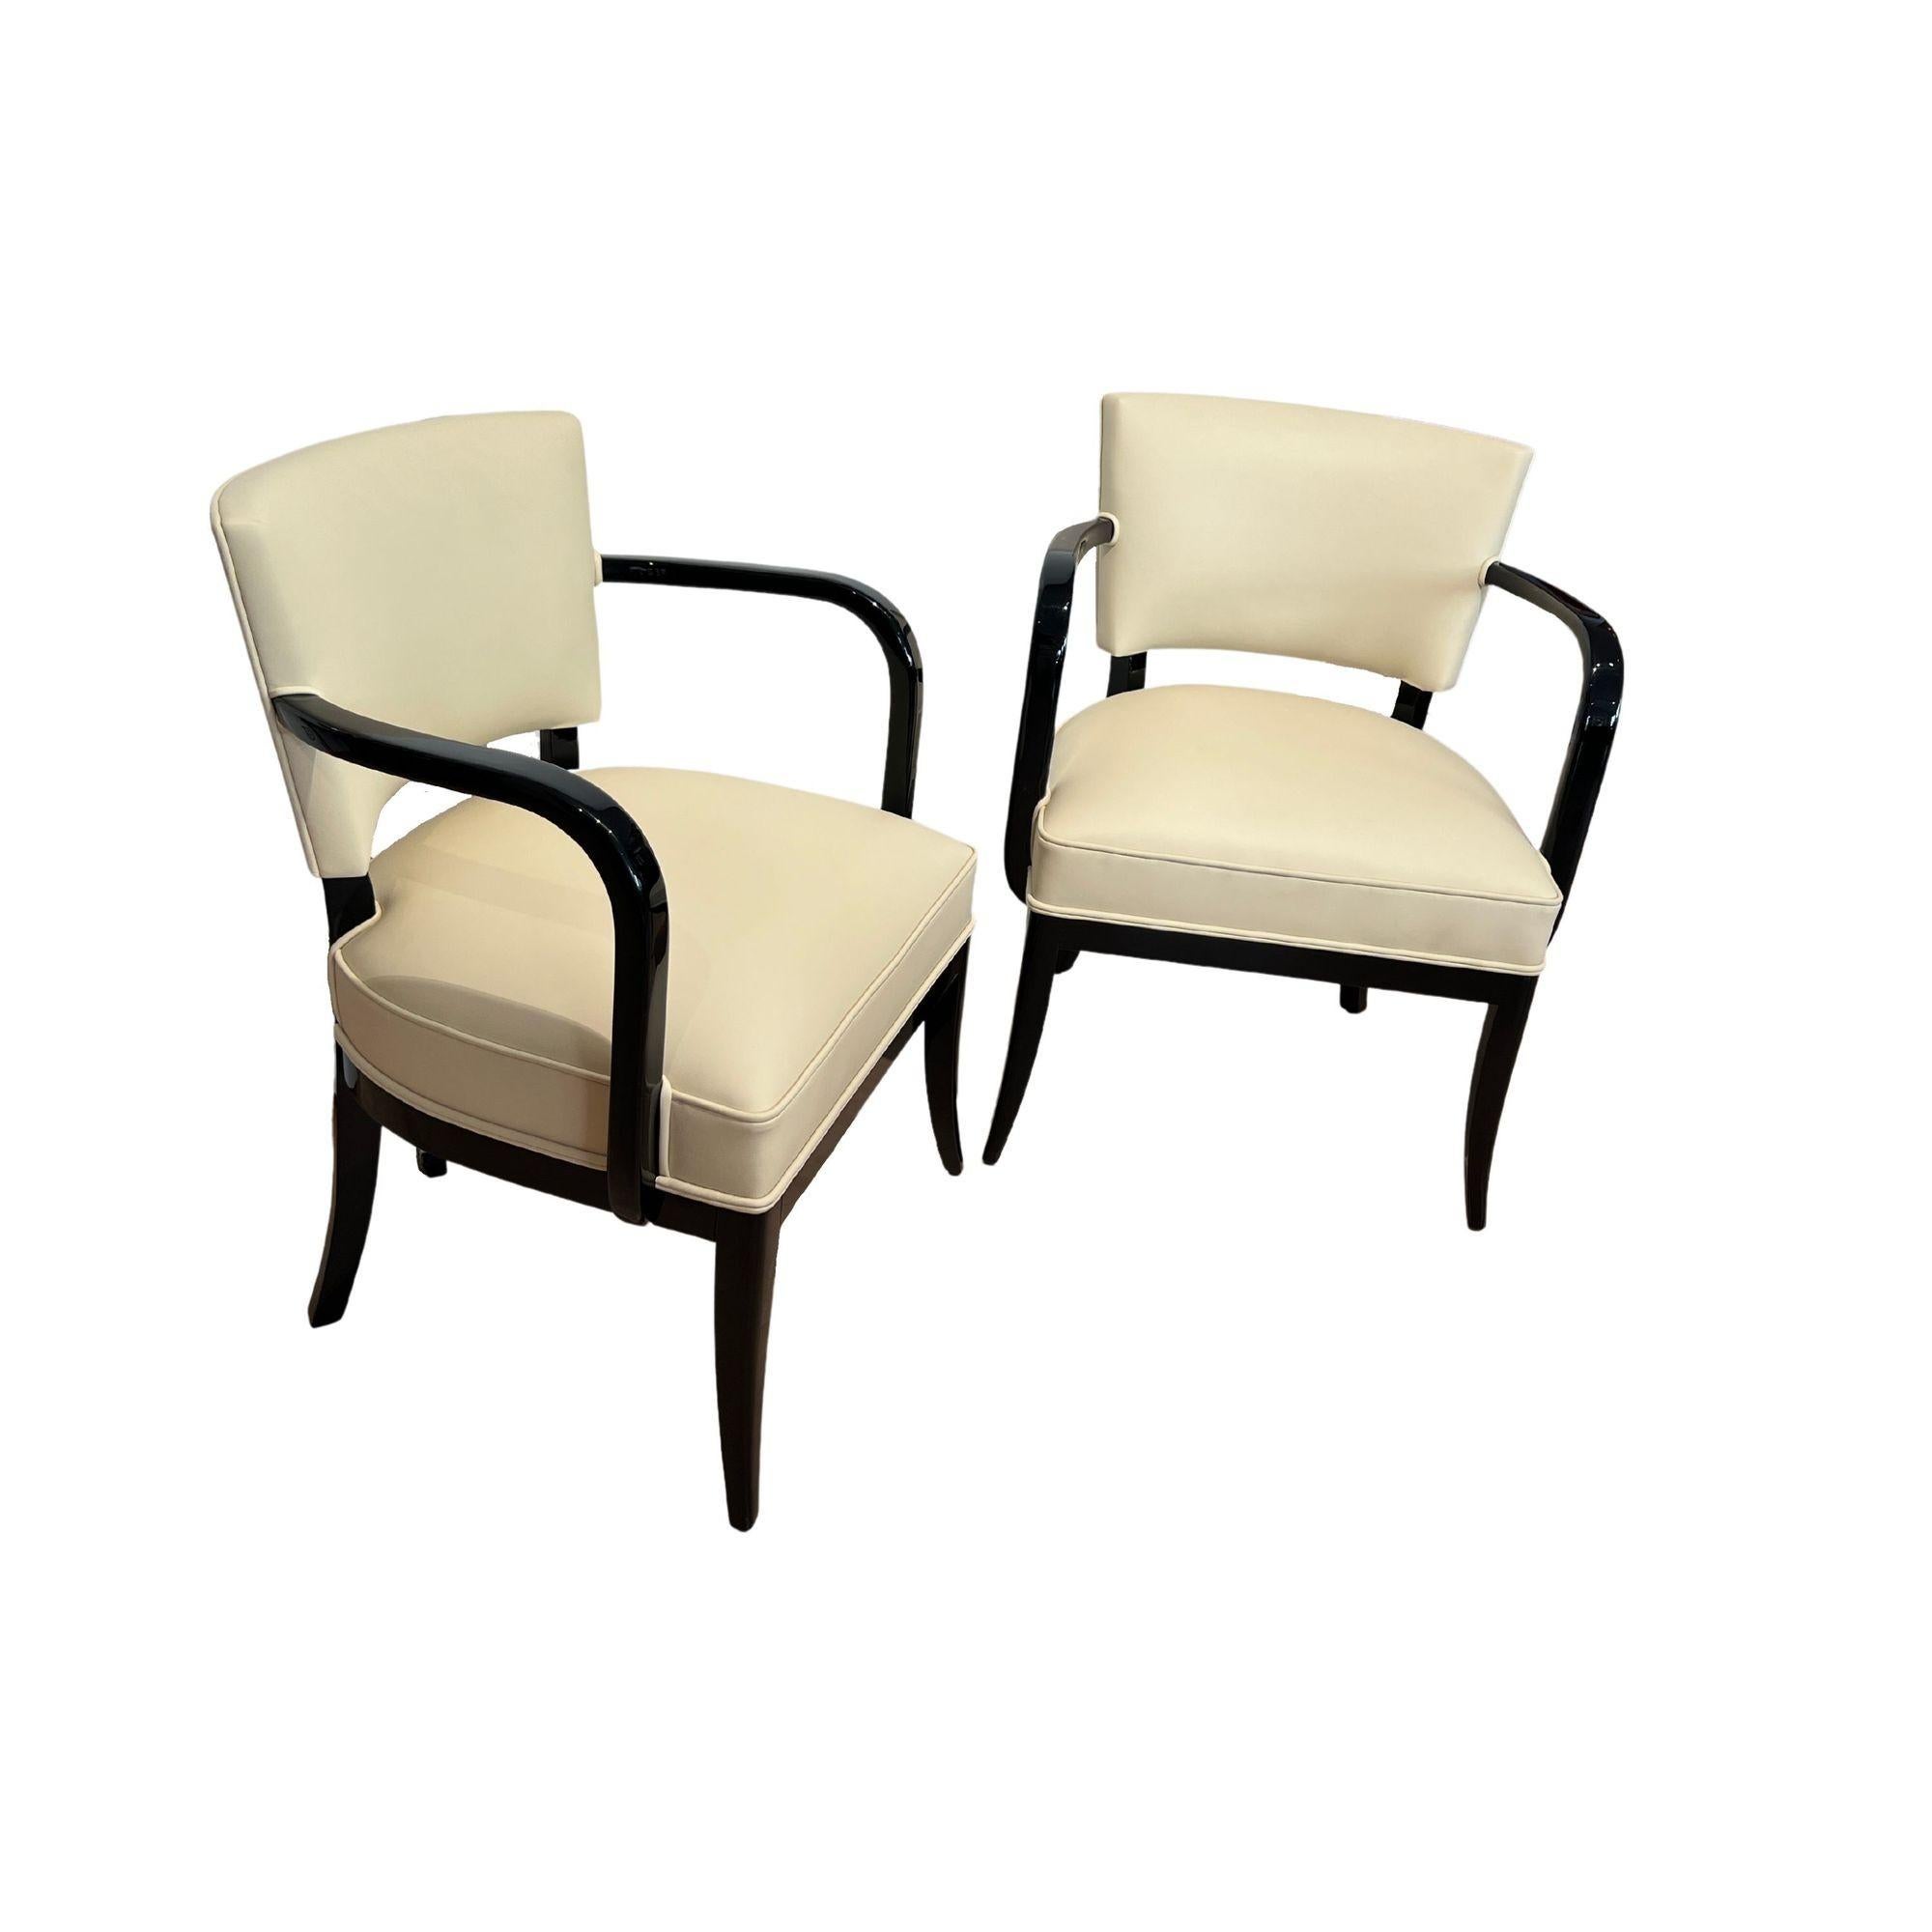 Pair of Art Deco Armchairs (2), Black Lacquer, Creme Leather, France circa 1930
 
Beech solid wood frame, black high gloss lacquered. Newly upholstered with cream-white genuine leather and double keder. 

Very good seating comfort due to wide seat